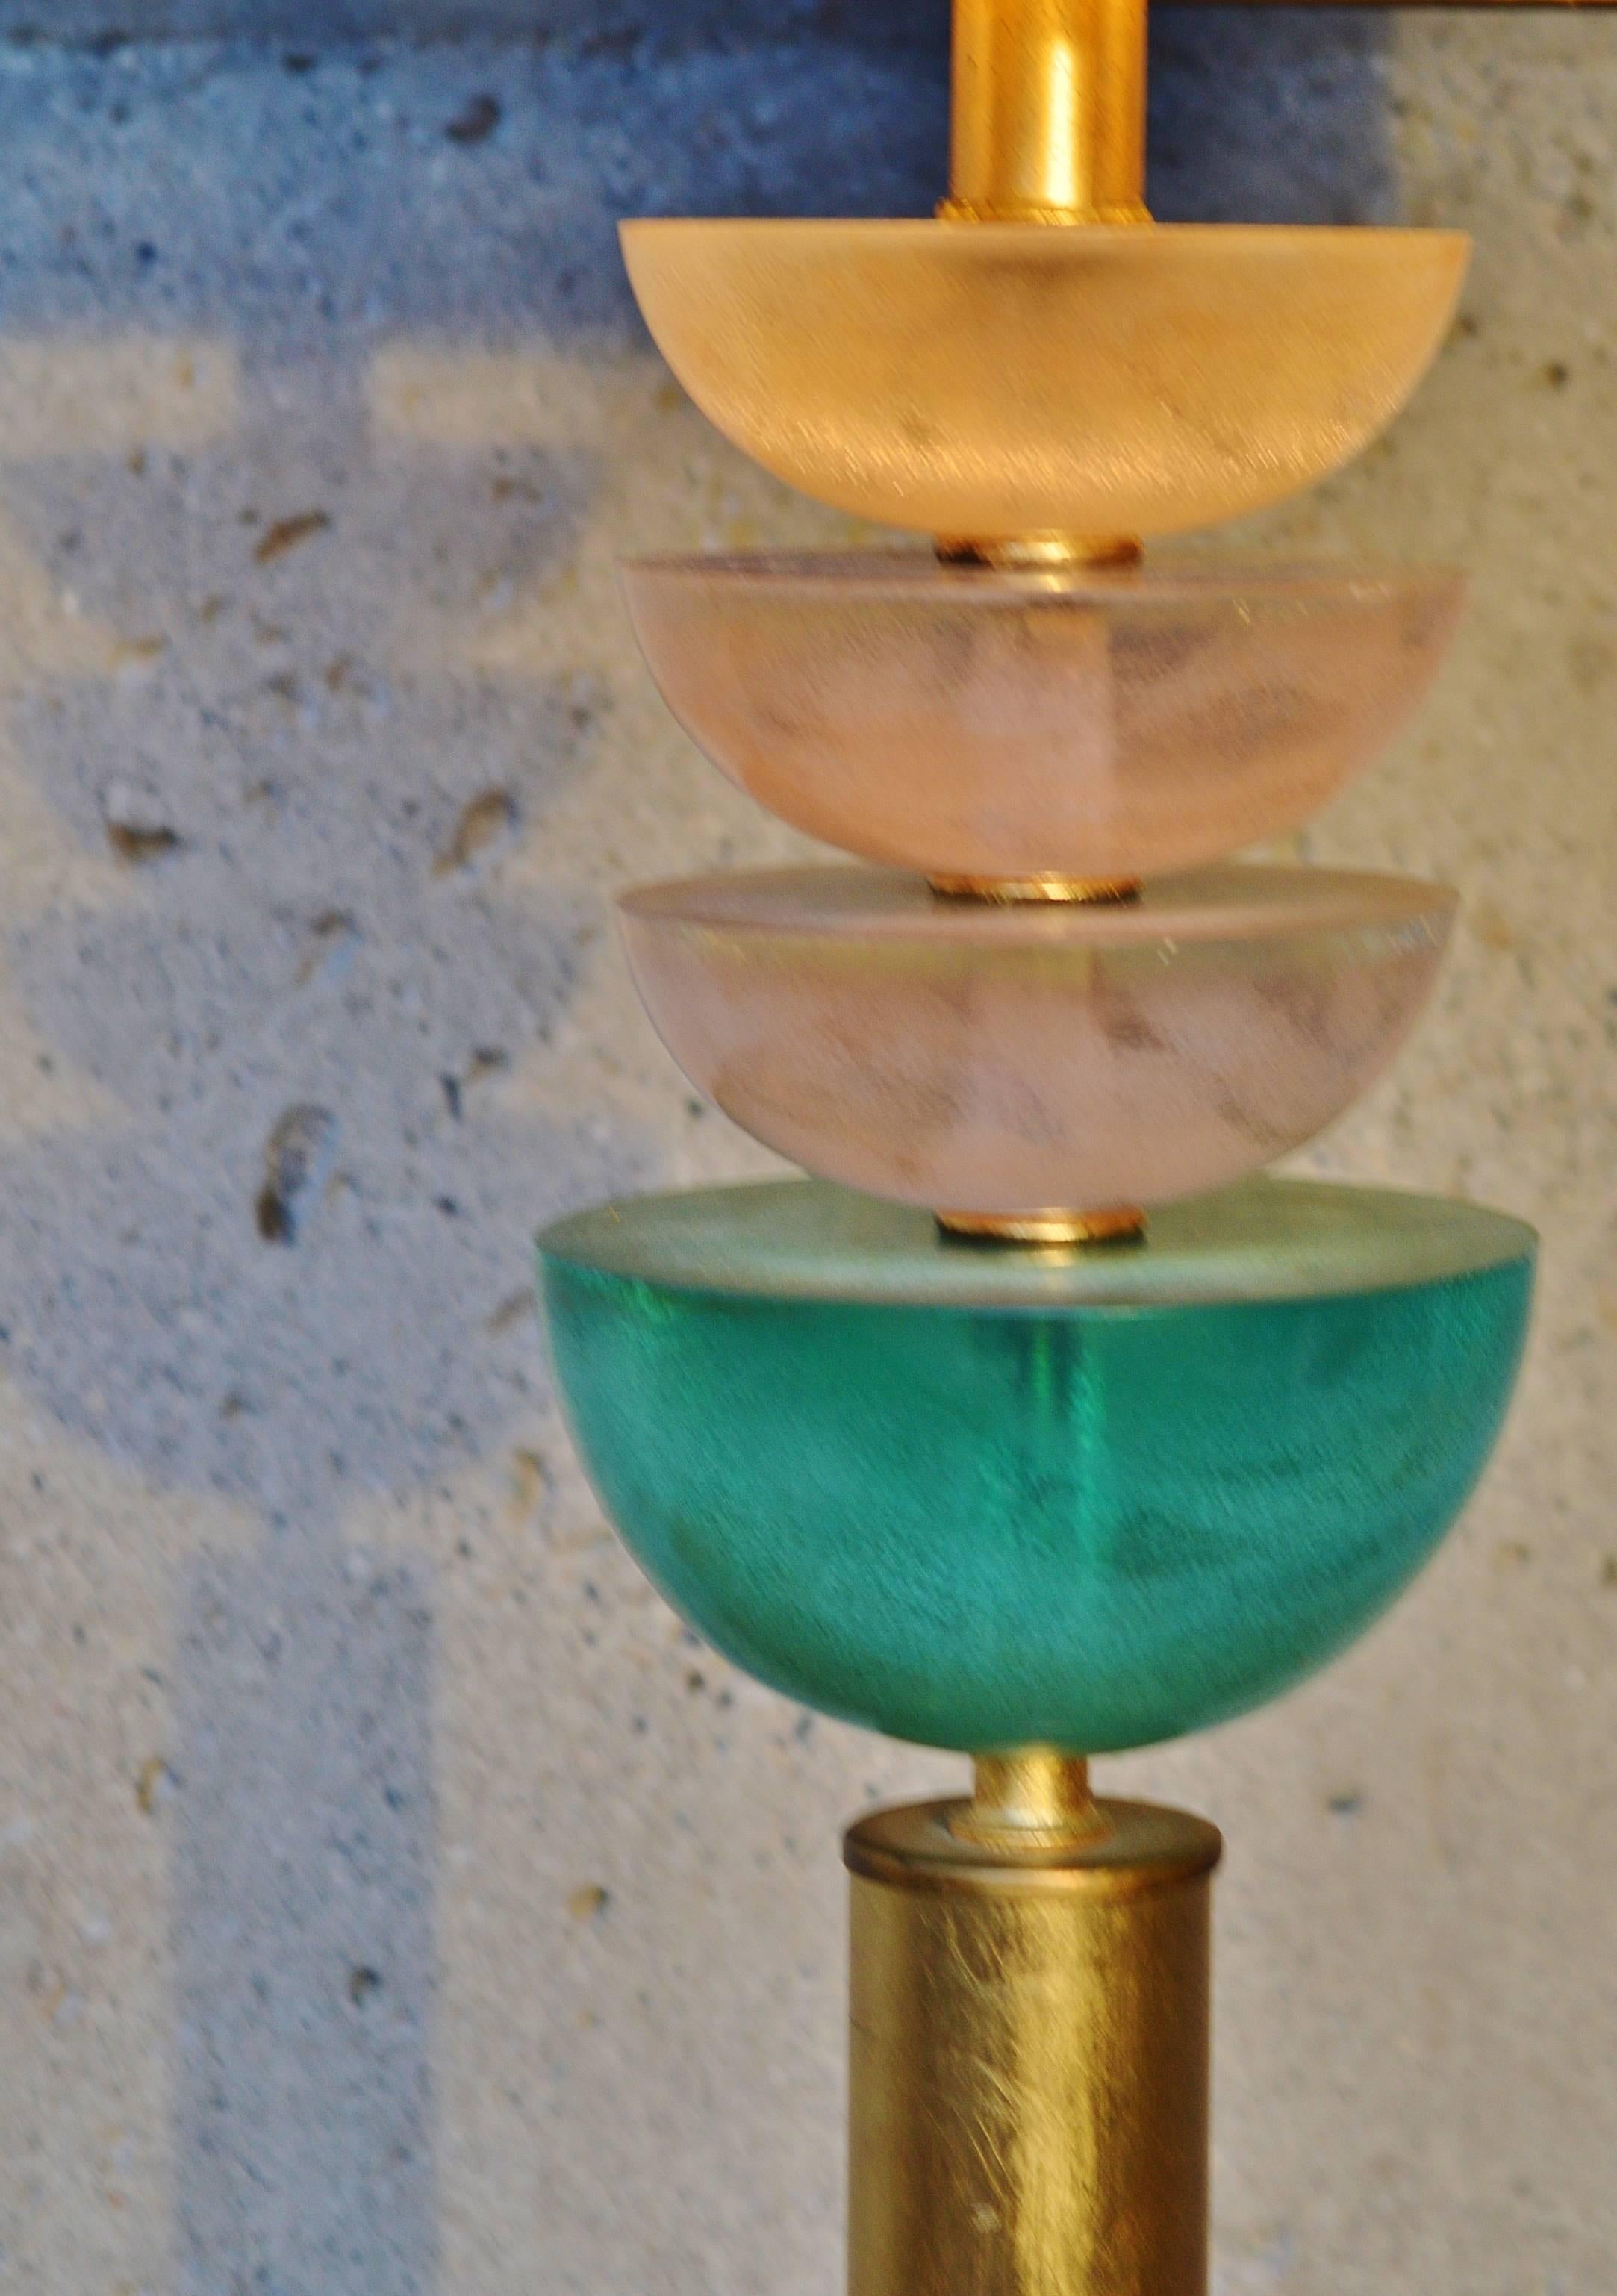 This absolutely striking Hollywood Regency lamp is comprised of four stacked lucite half spheres with one gold, two rose quartz and the larger, lowest one in turquoise.  Gold leaf gilt cubic base and cylinder stem with brass rings between each